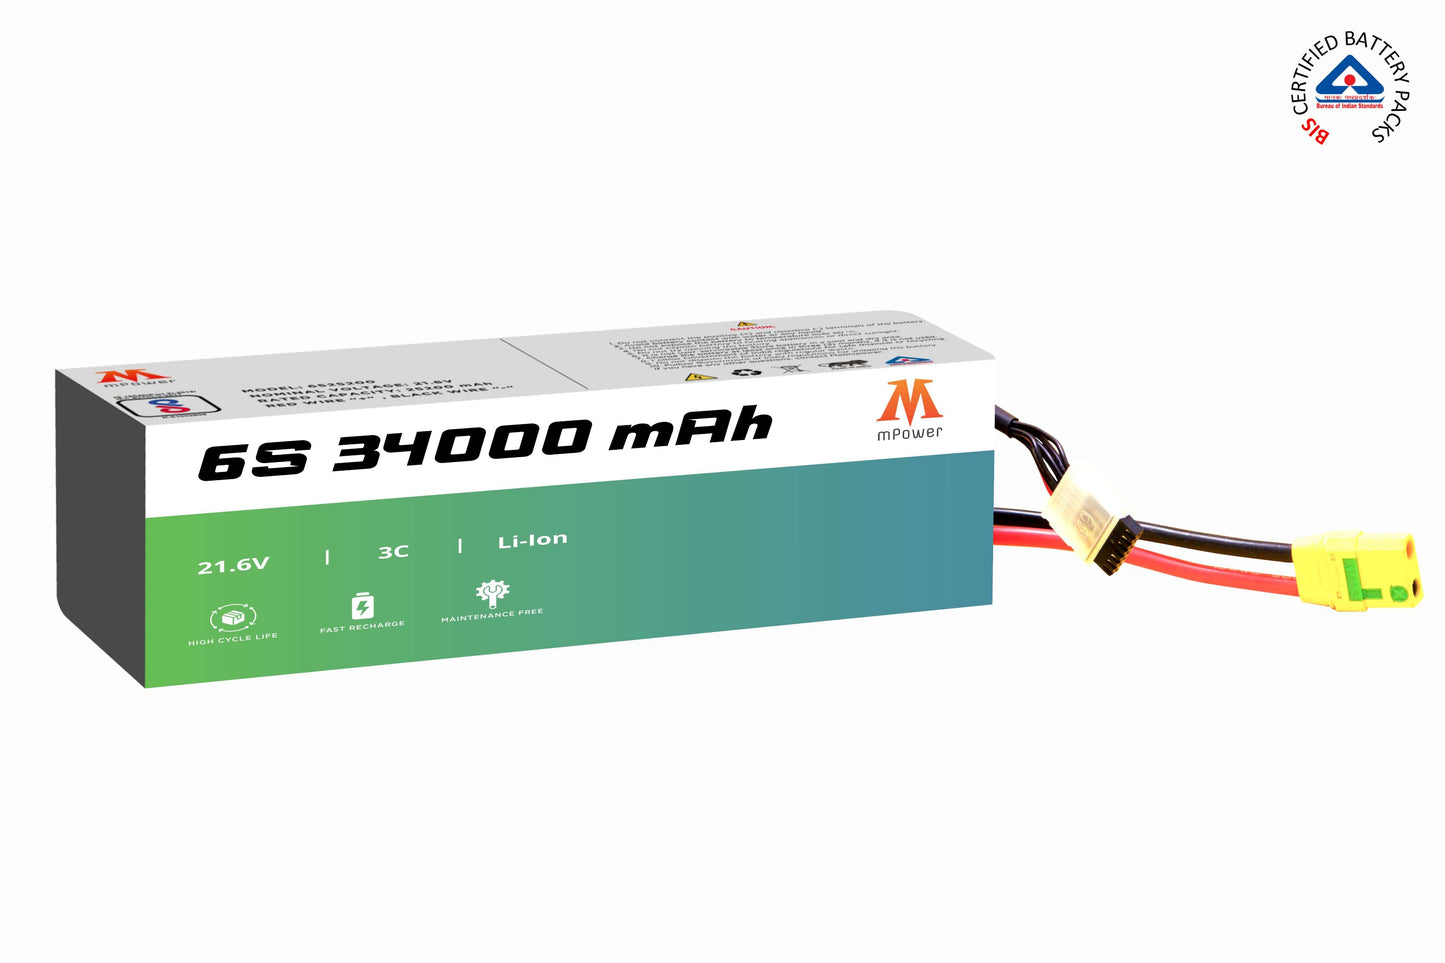 mPower 6S 34000mAh Lithium-Ion Battery for Surveillance Drones